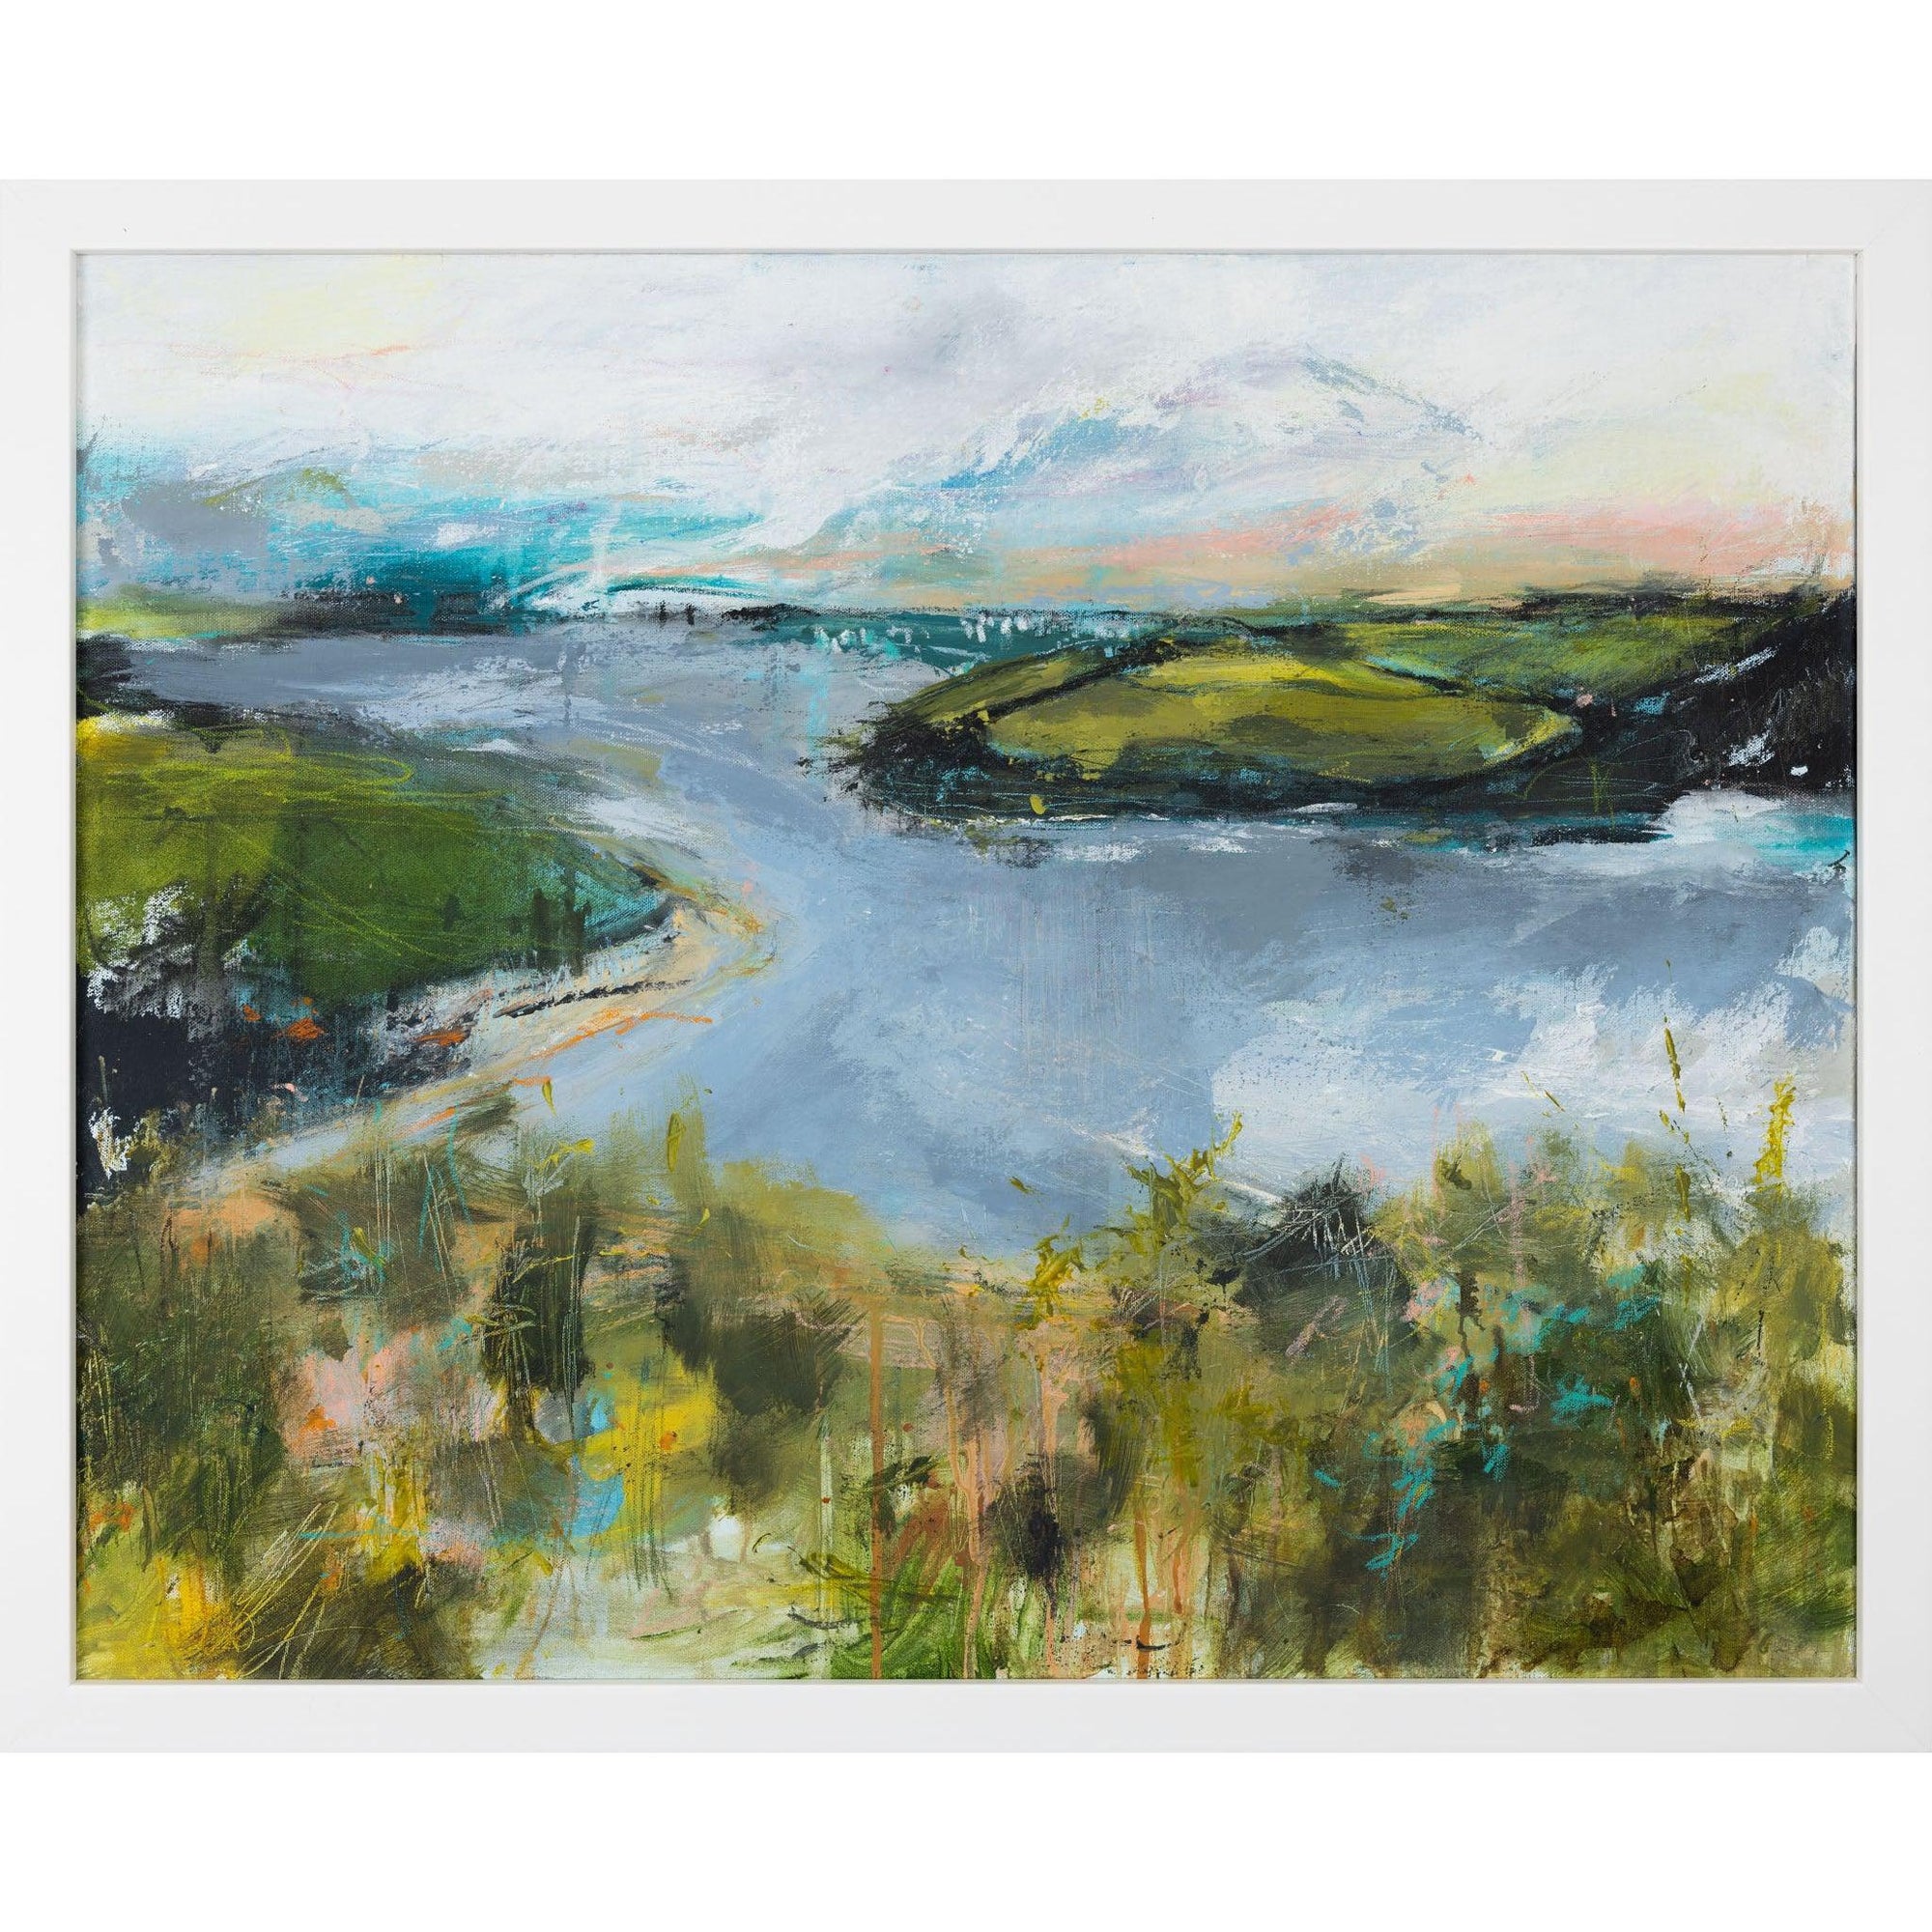 'Above Daymer' mixed media original by Sarah Pooley, available at Padstow Gallery, Cornwall.